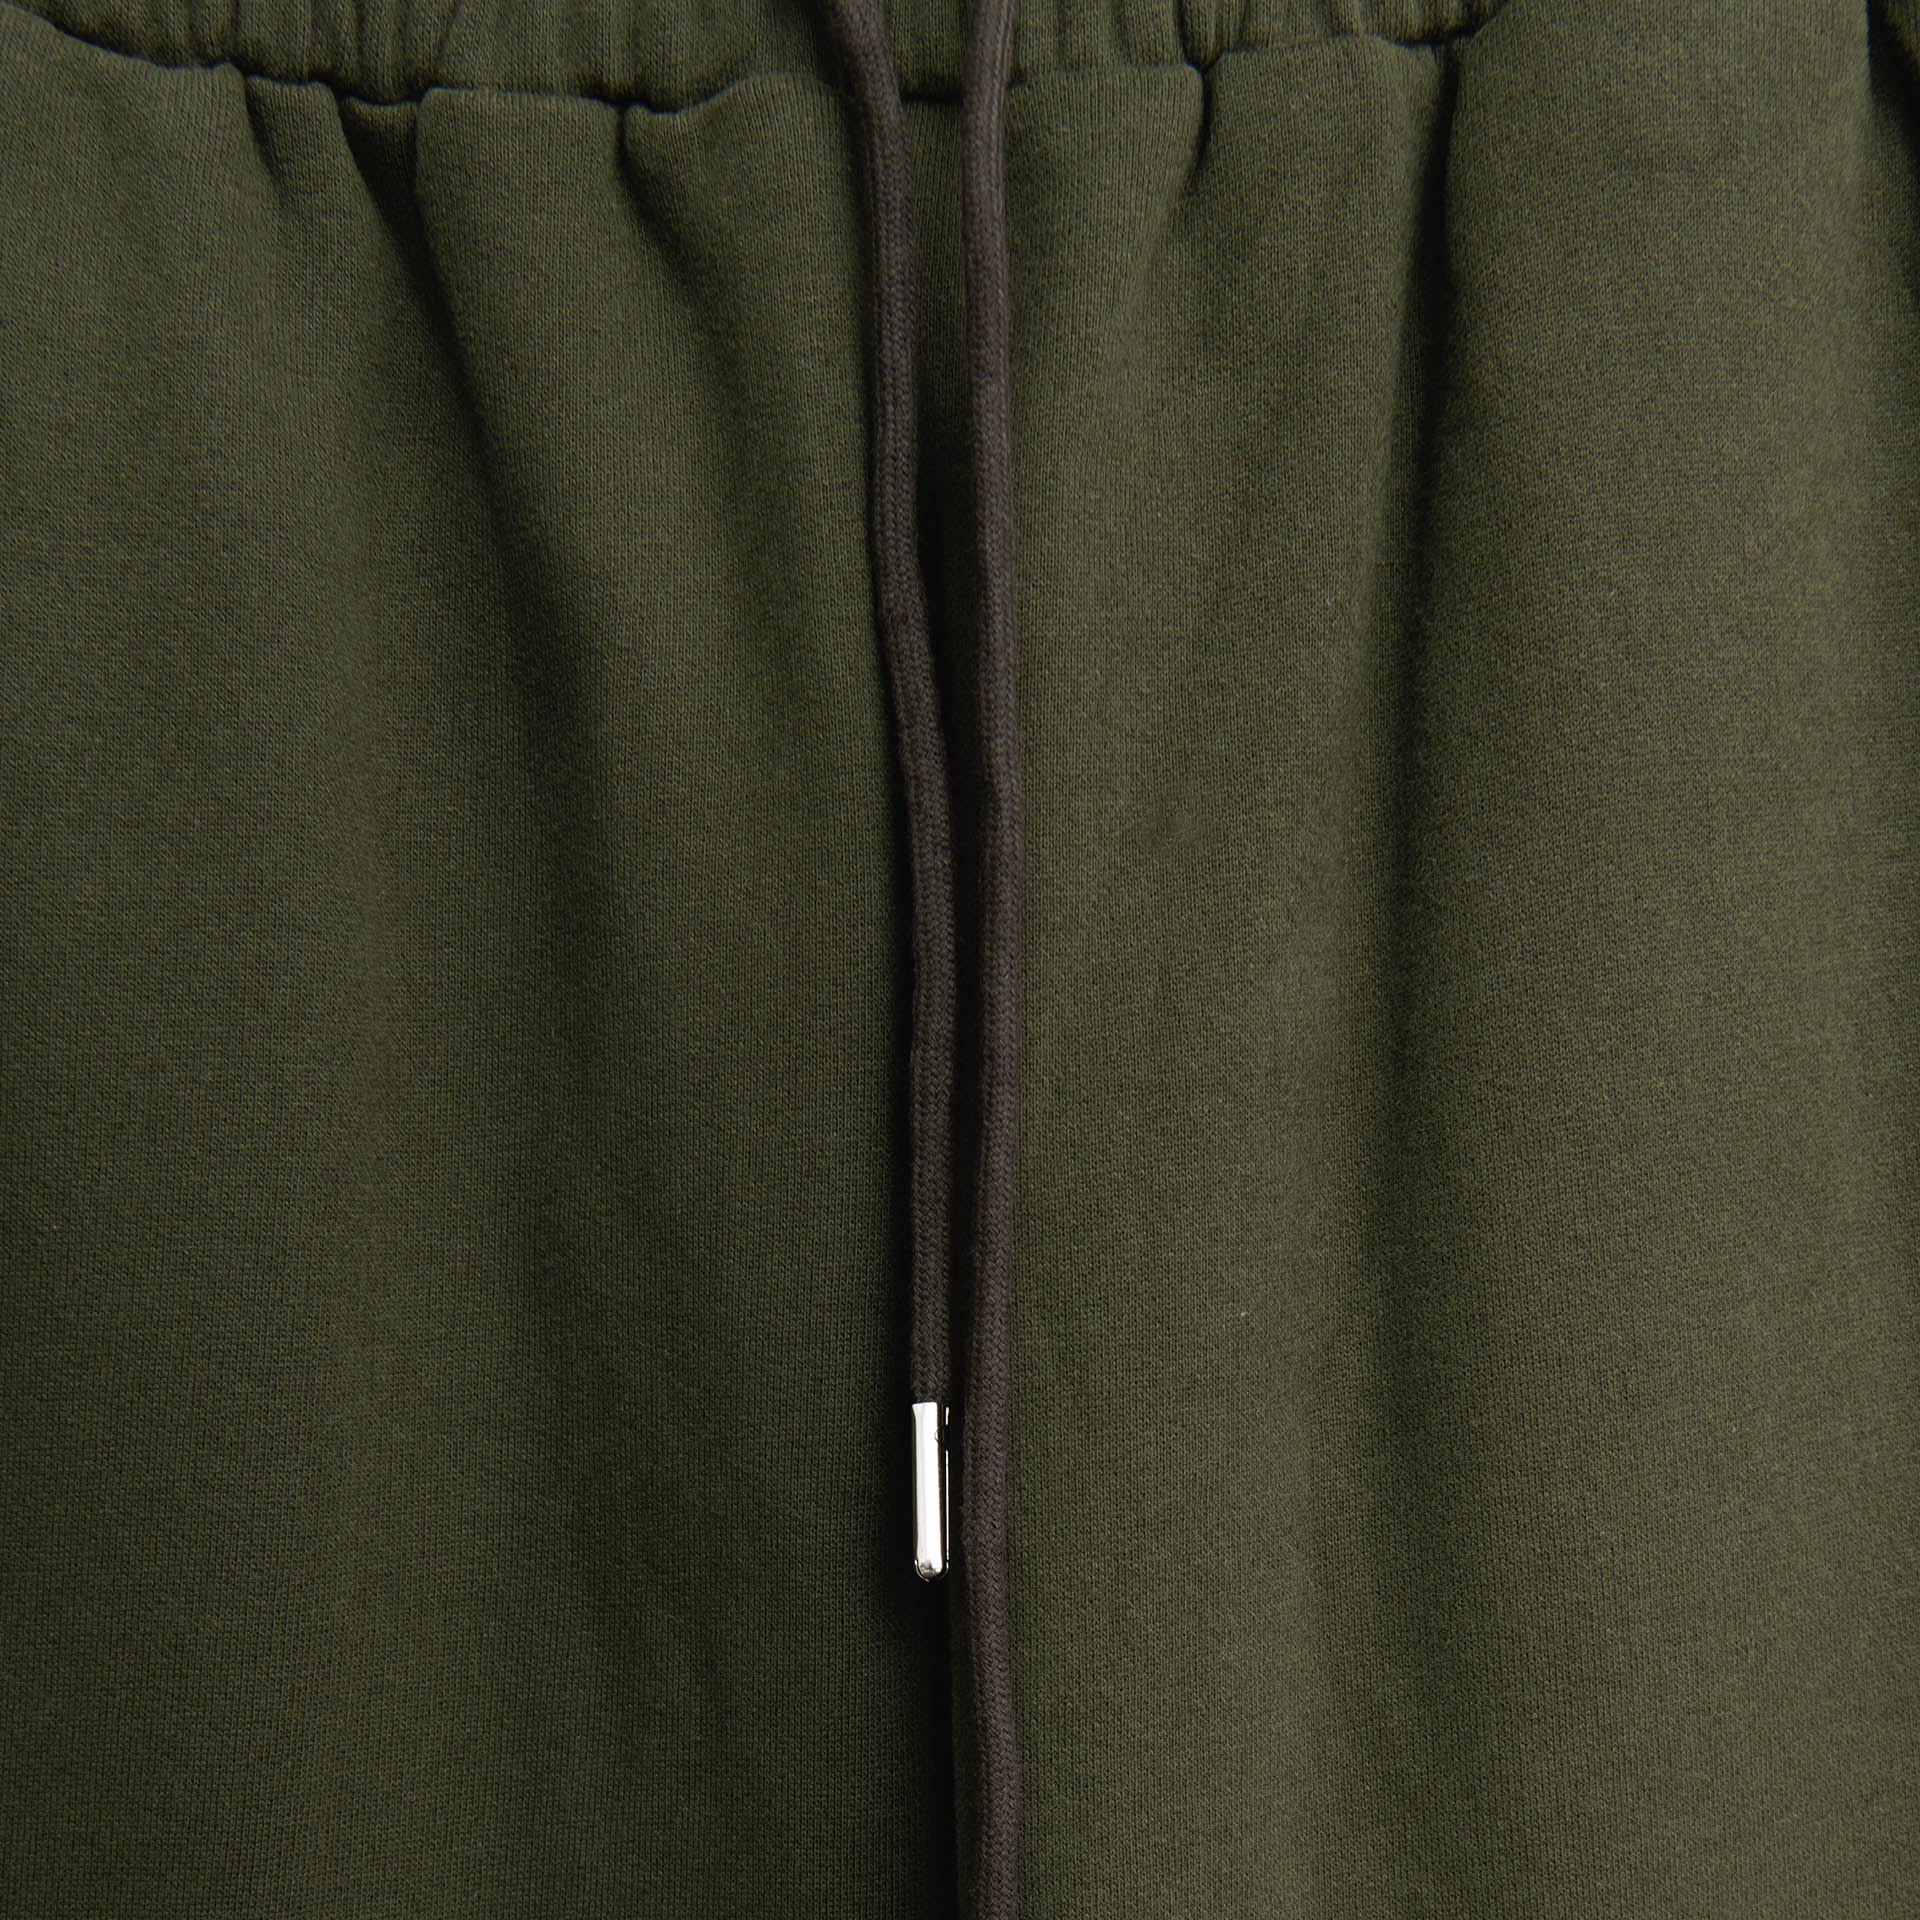 Olive Green Sweatpants From Unisi